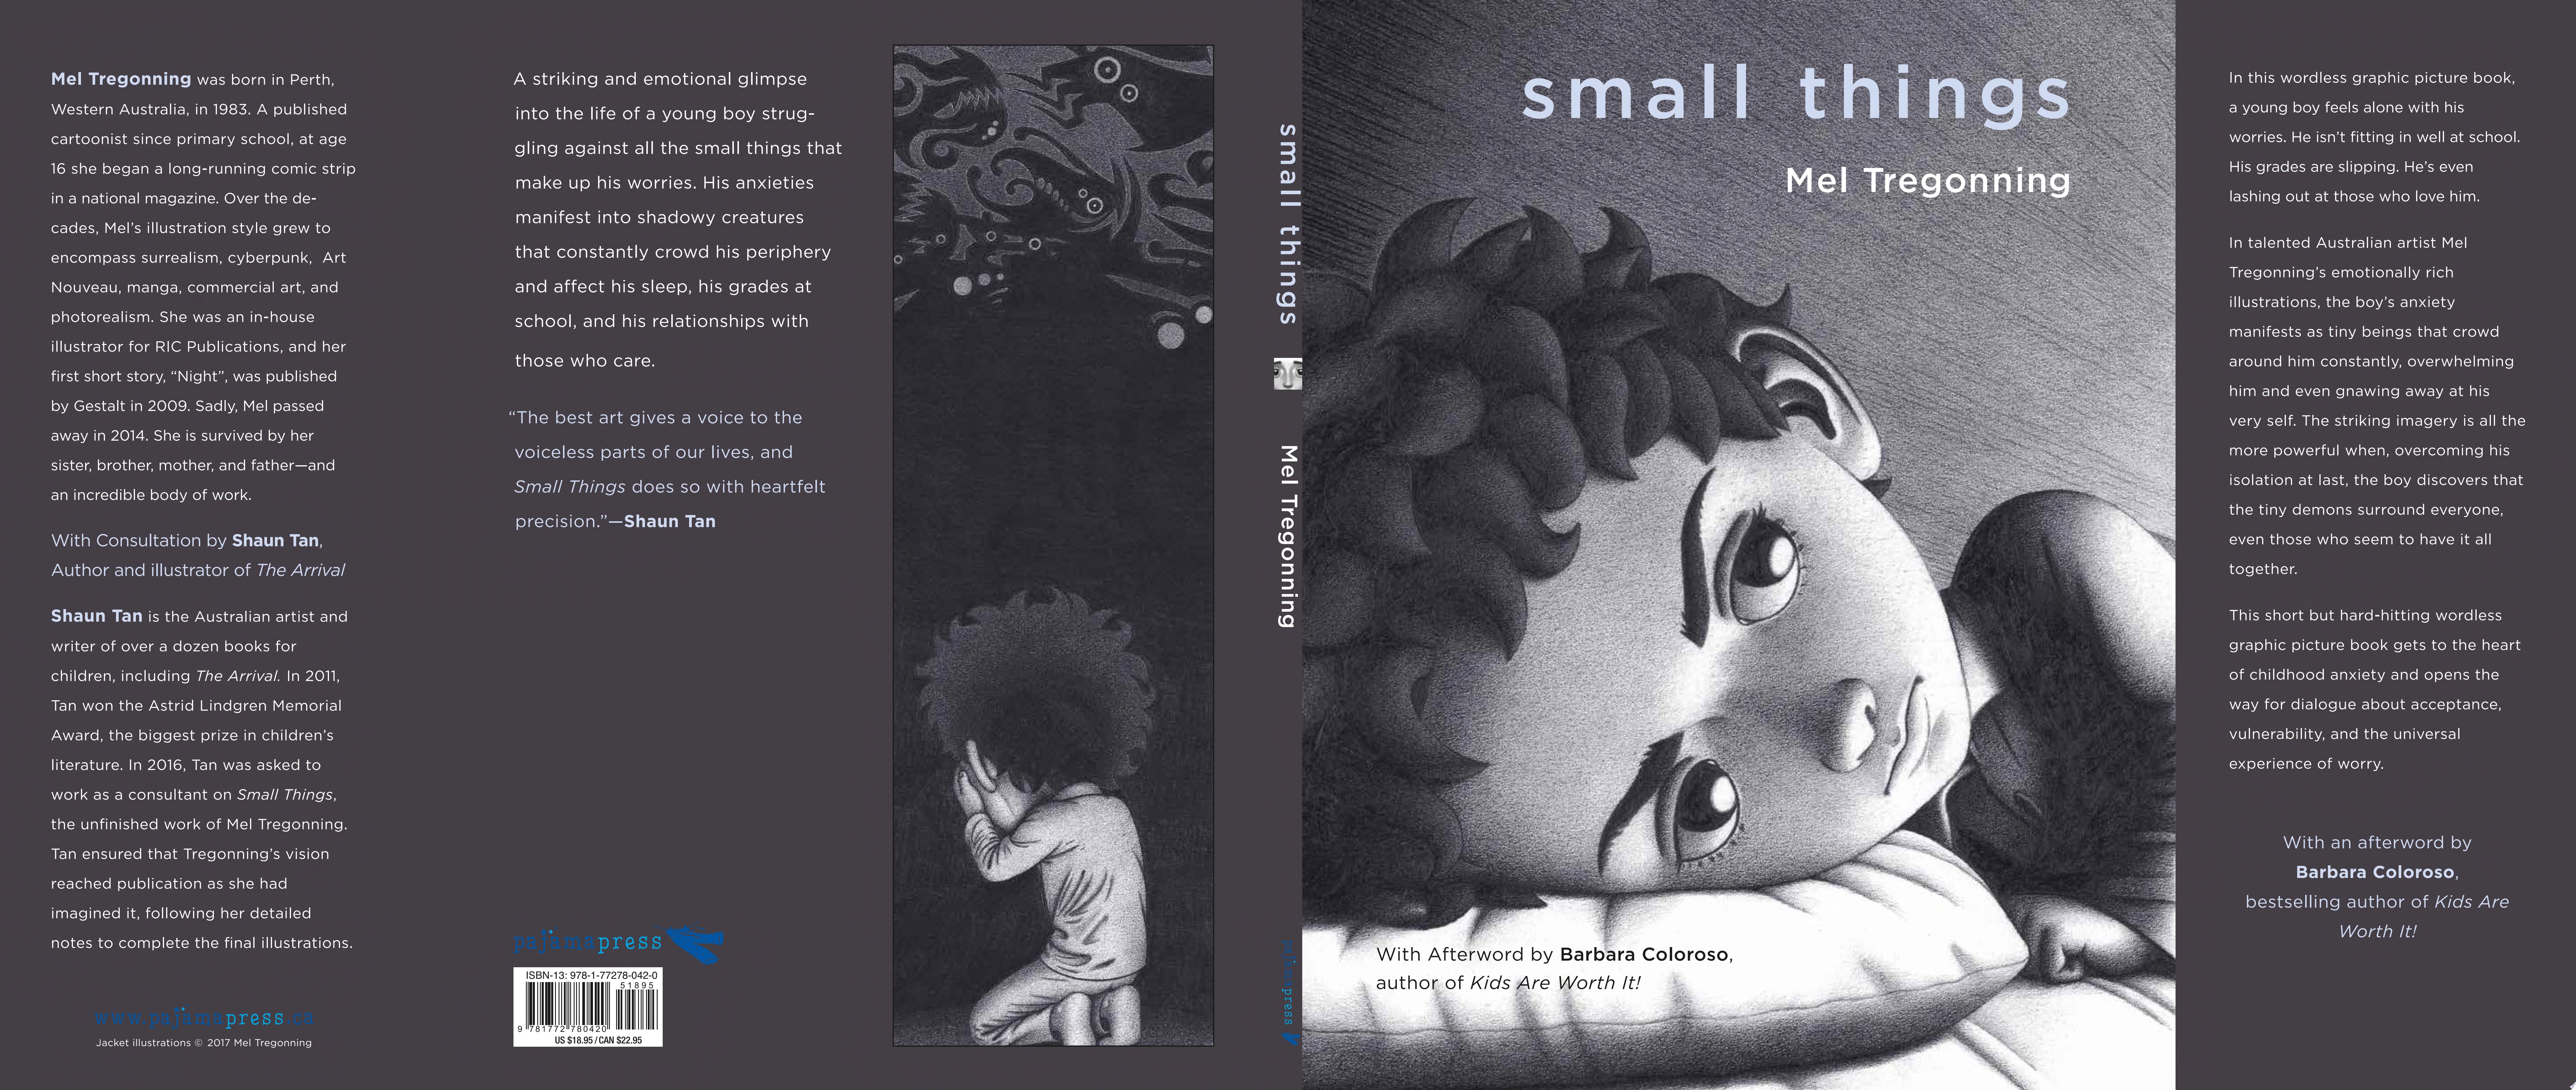 Image for "Small Things"